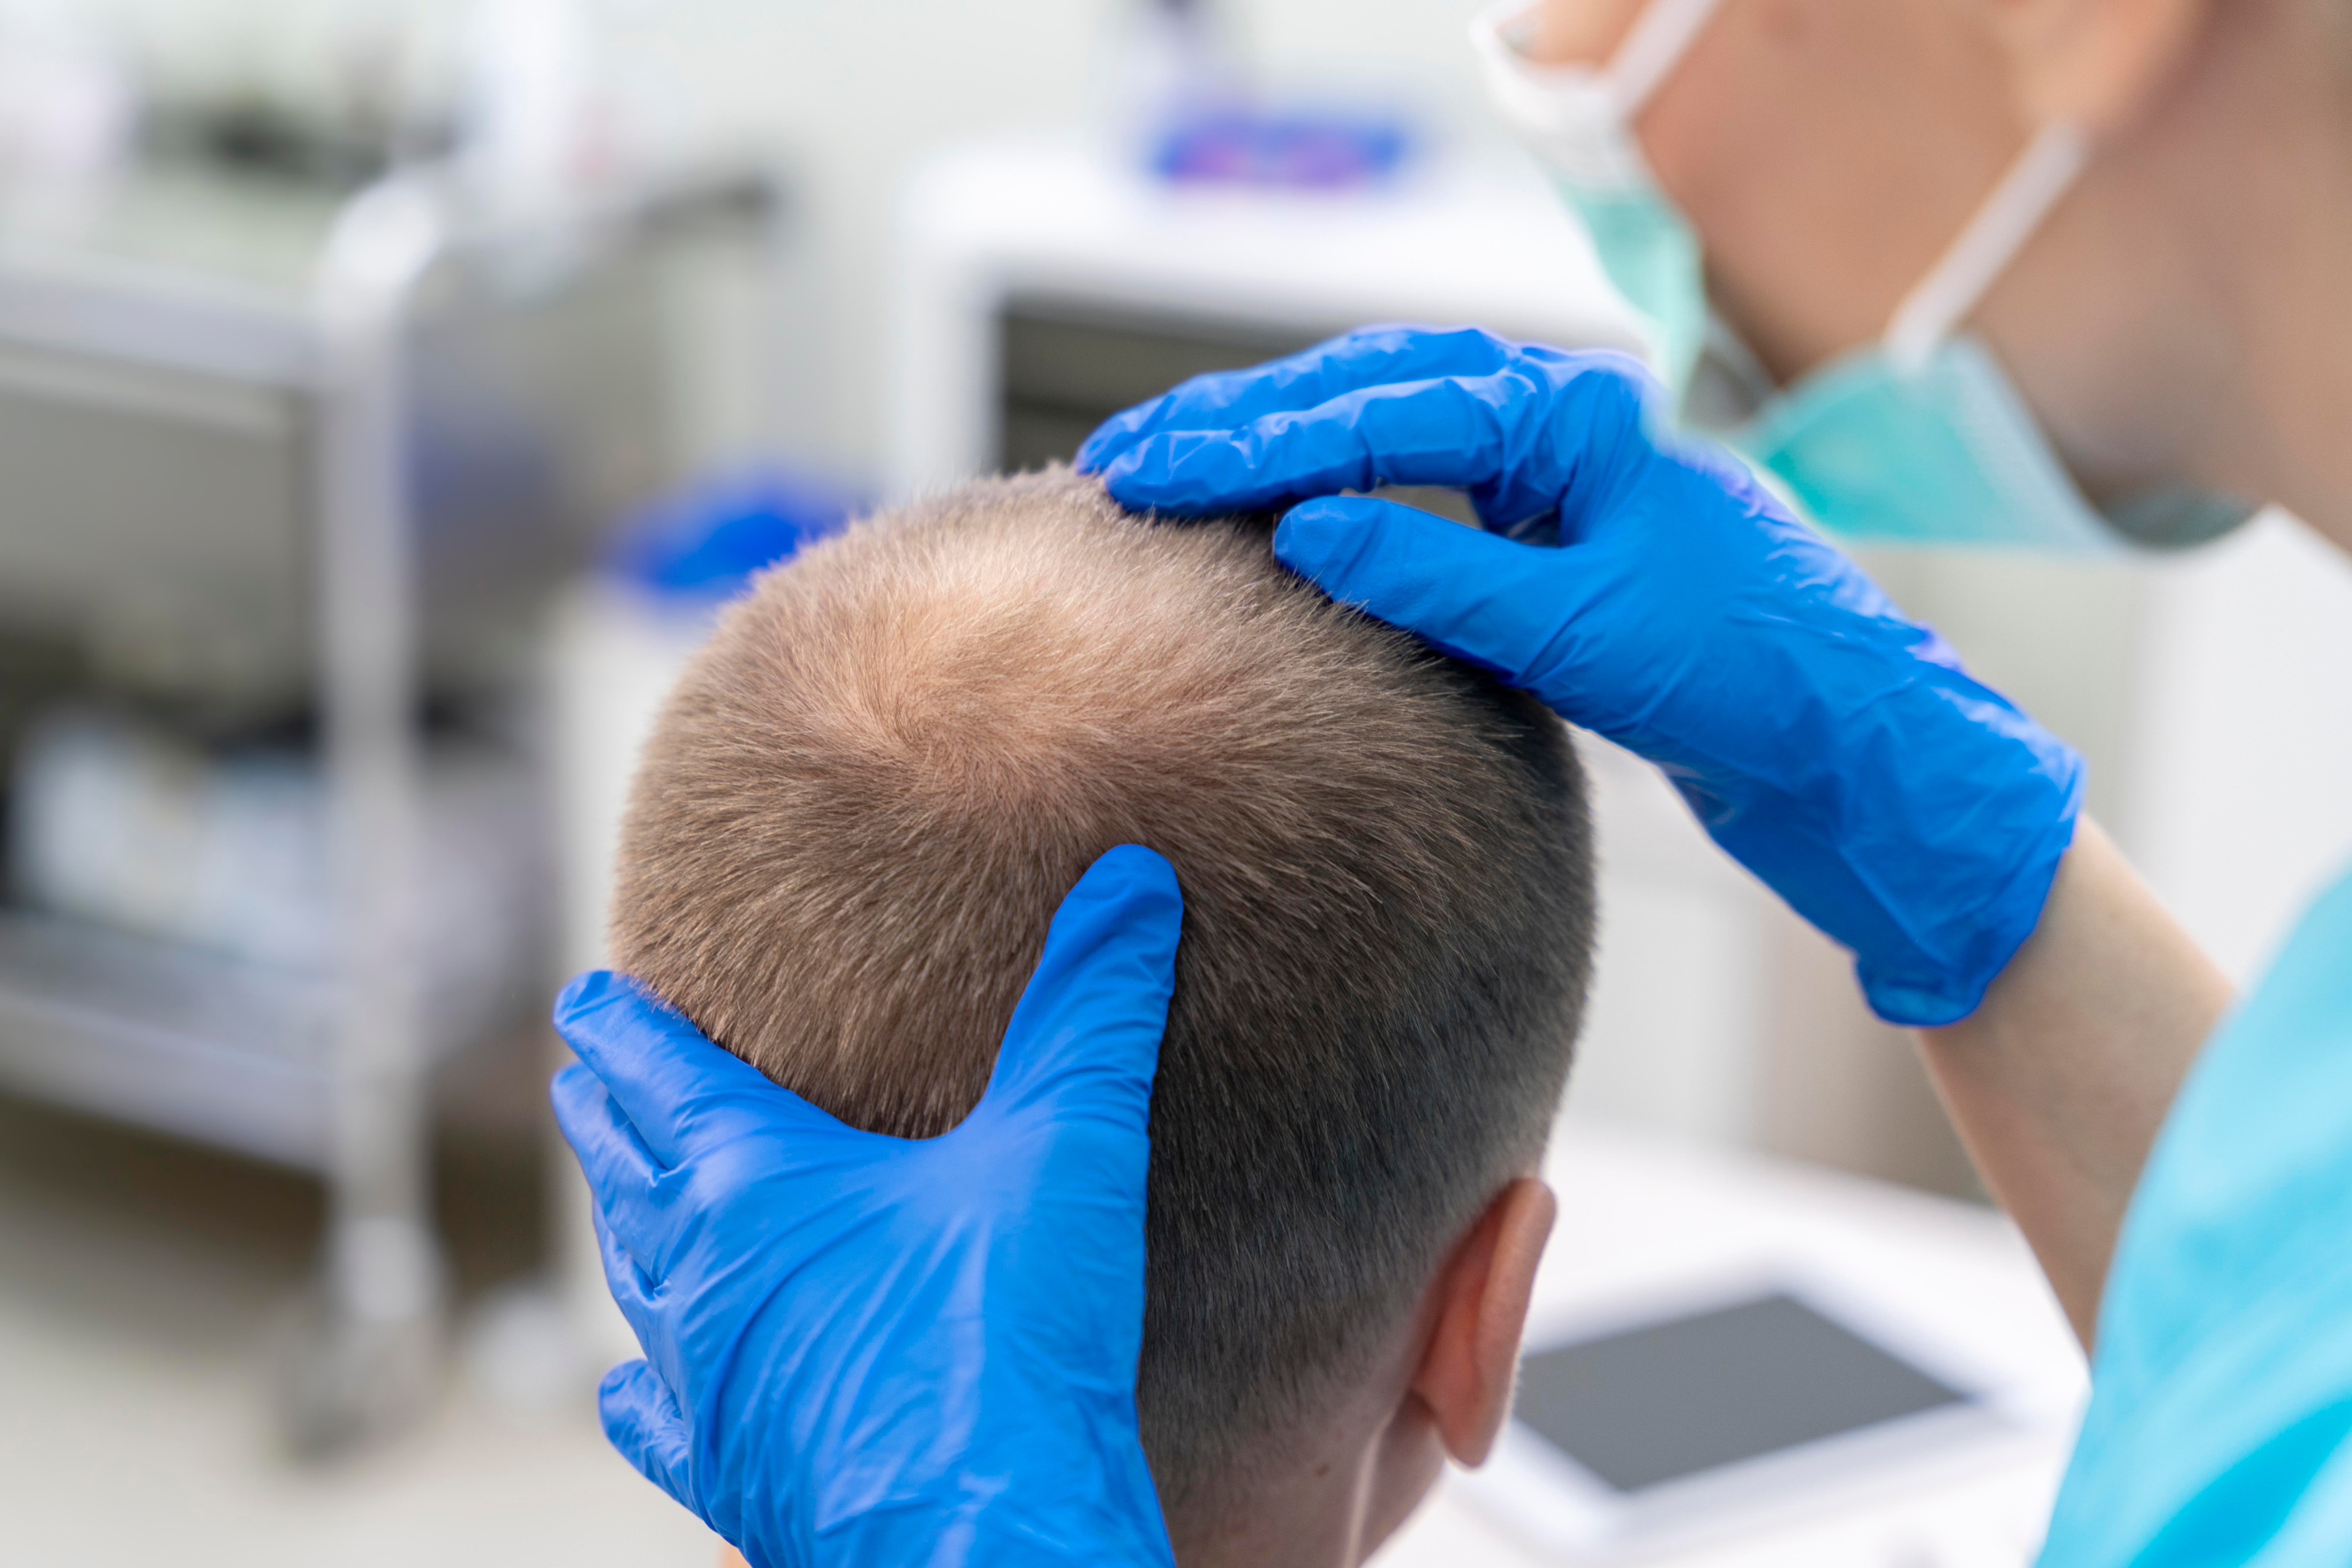 health professionals can treat severe hair loss with multiple hair loss treatment options